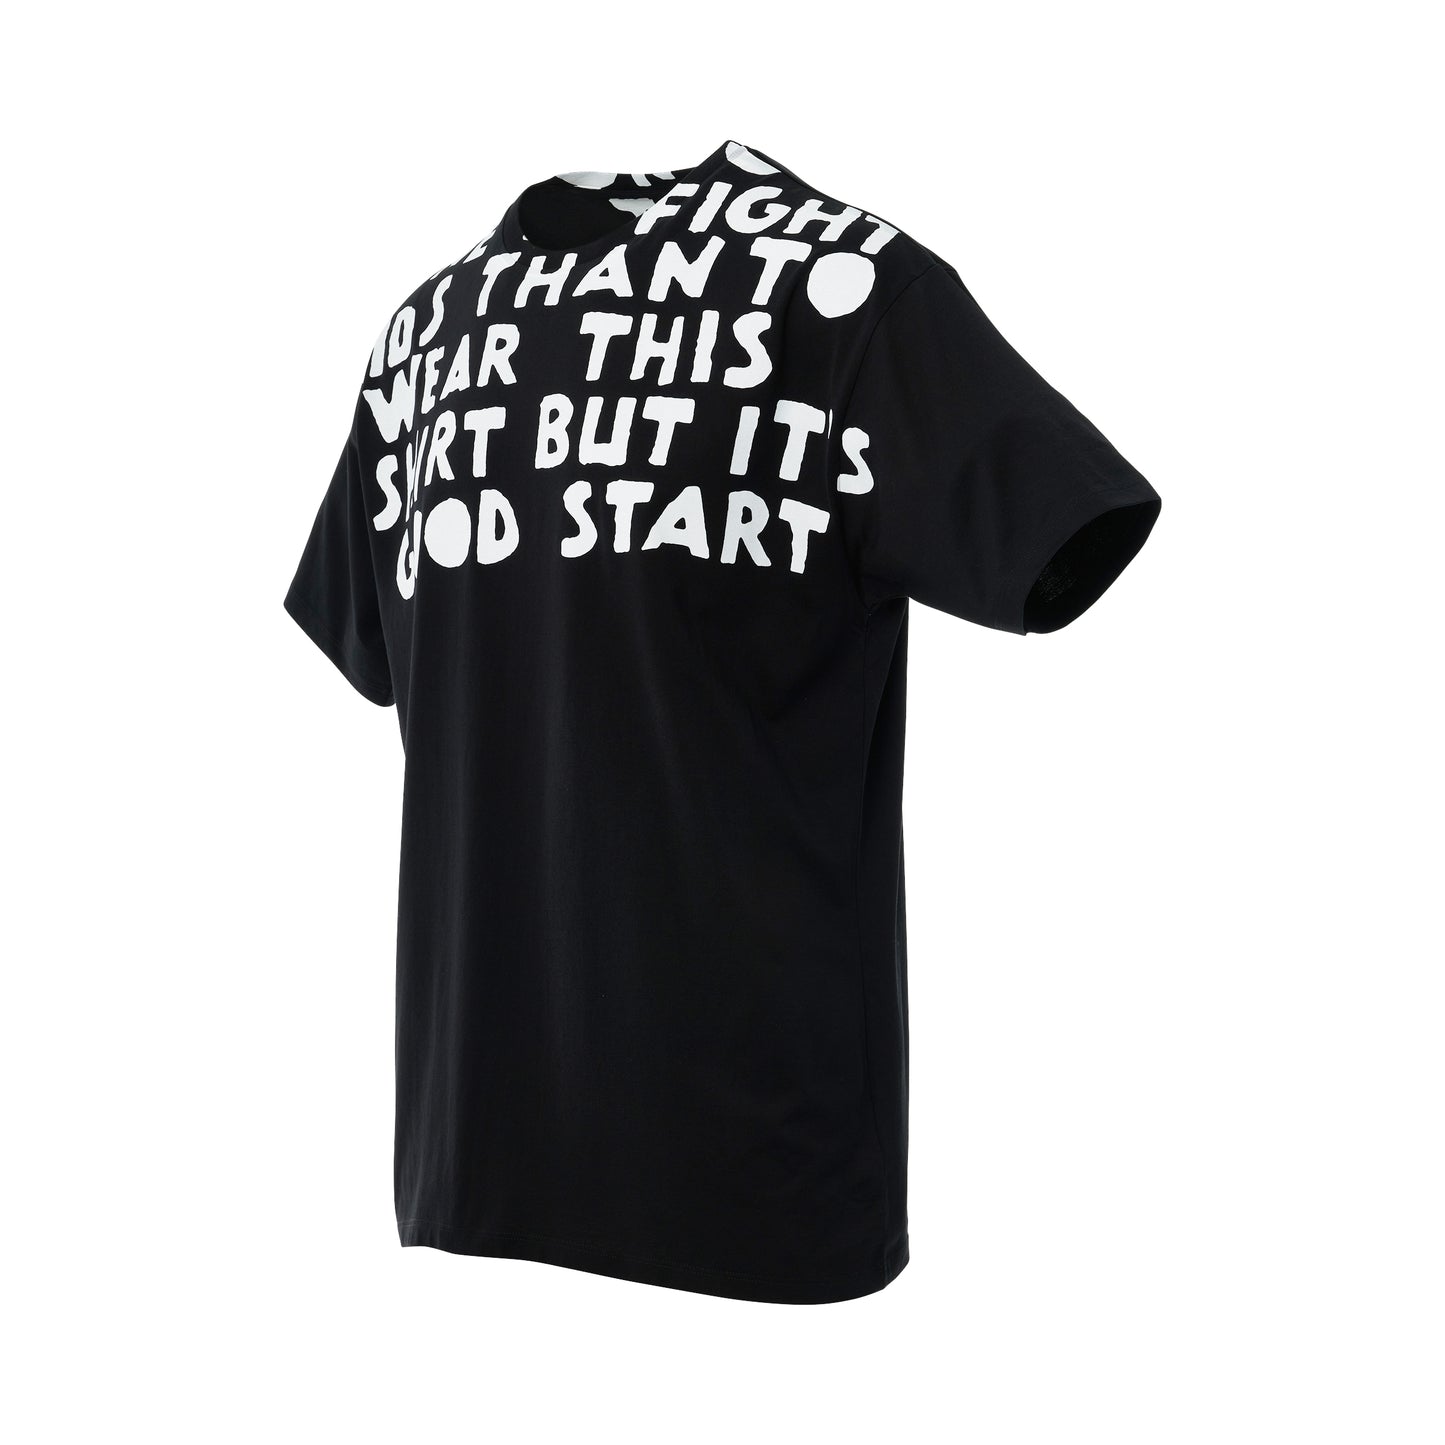 AIDS Charity T-Shirt in Black